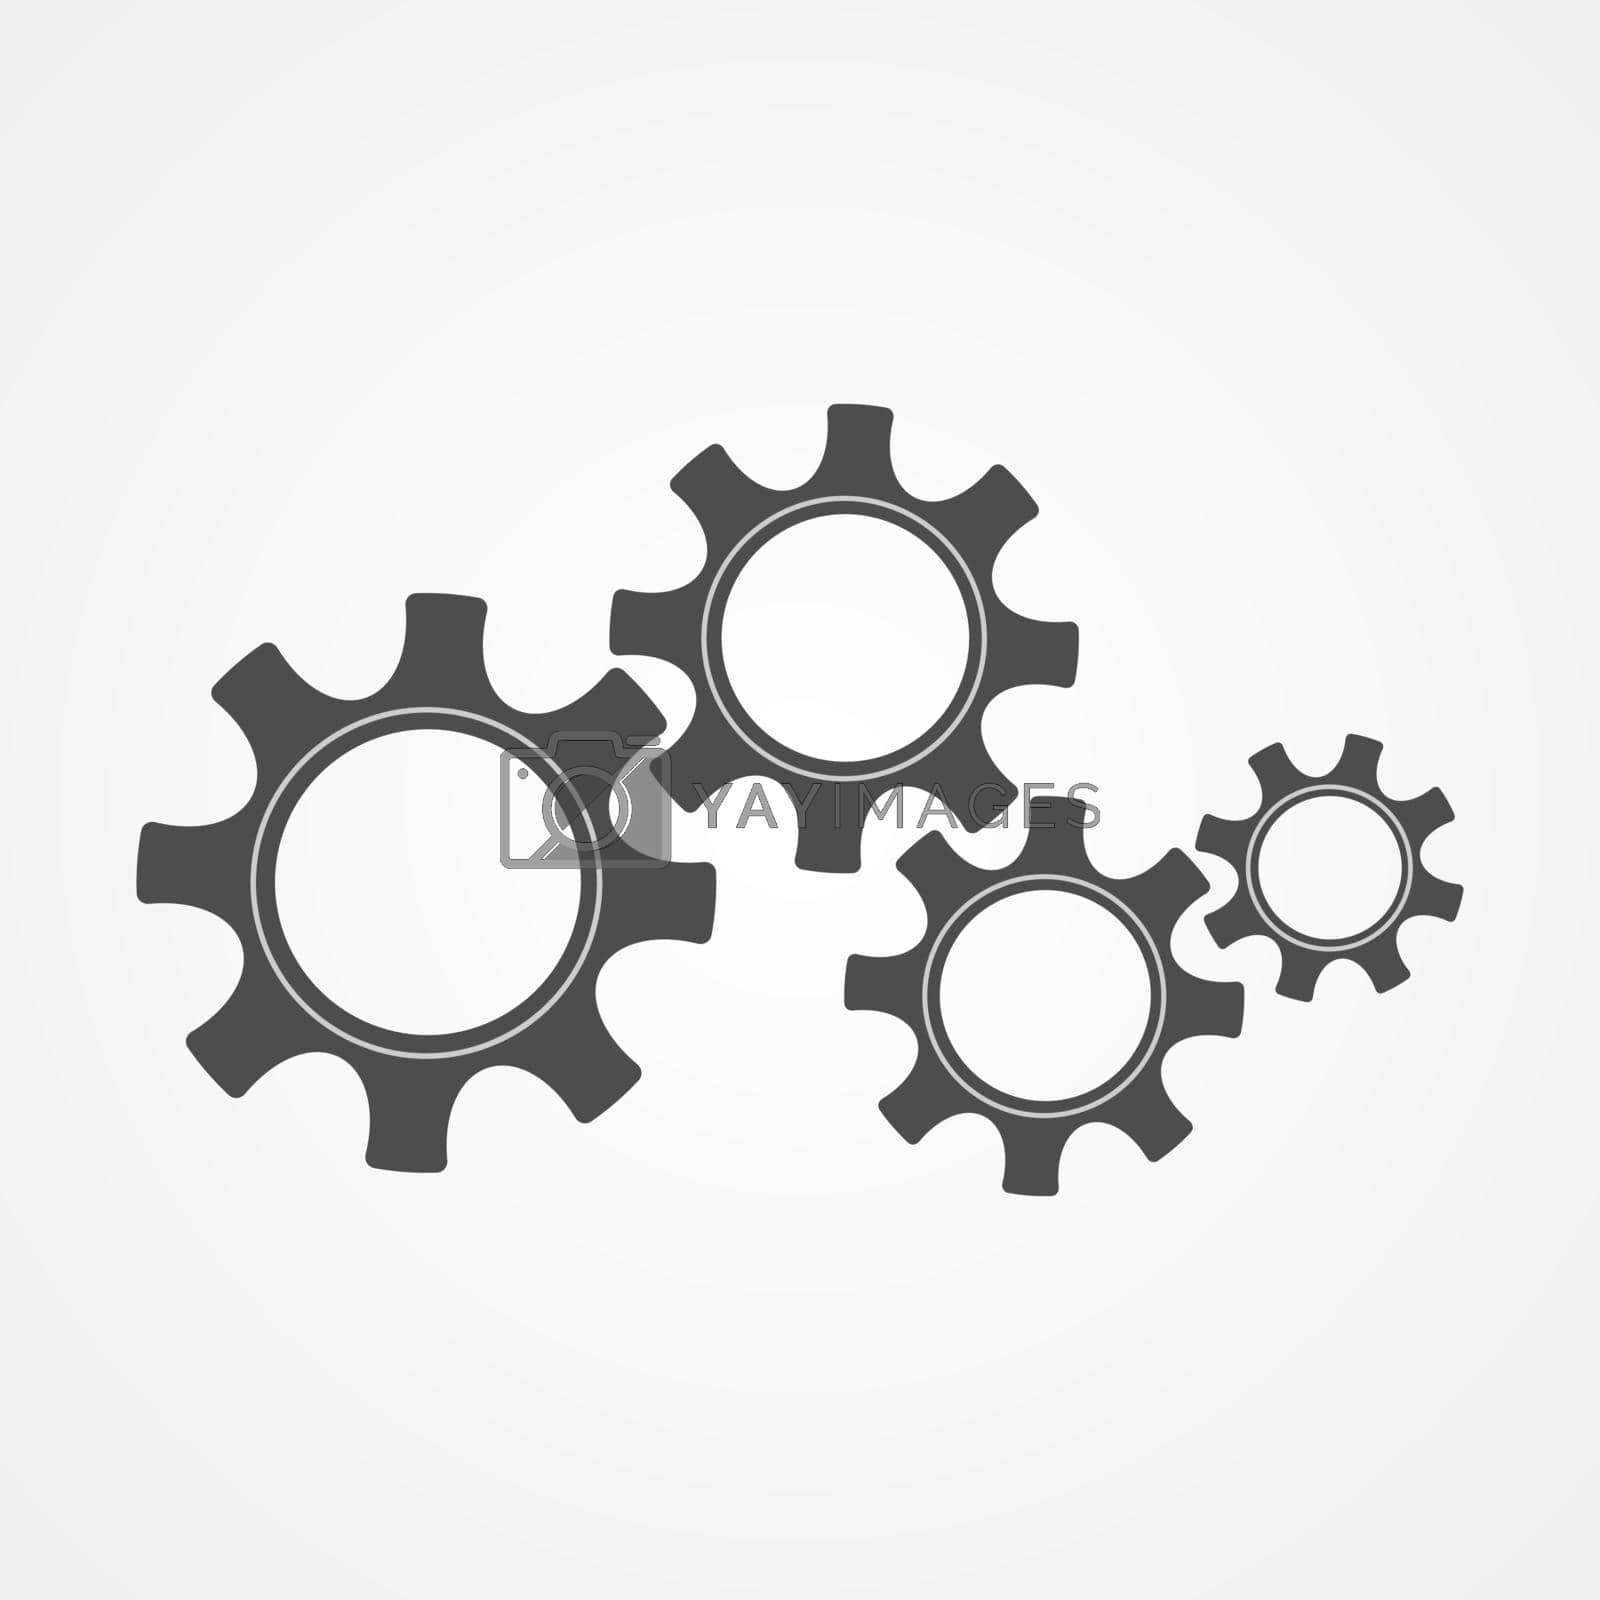 Royalty free image of Cooperation concept black silhouette cog and gear by moonnoon